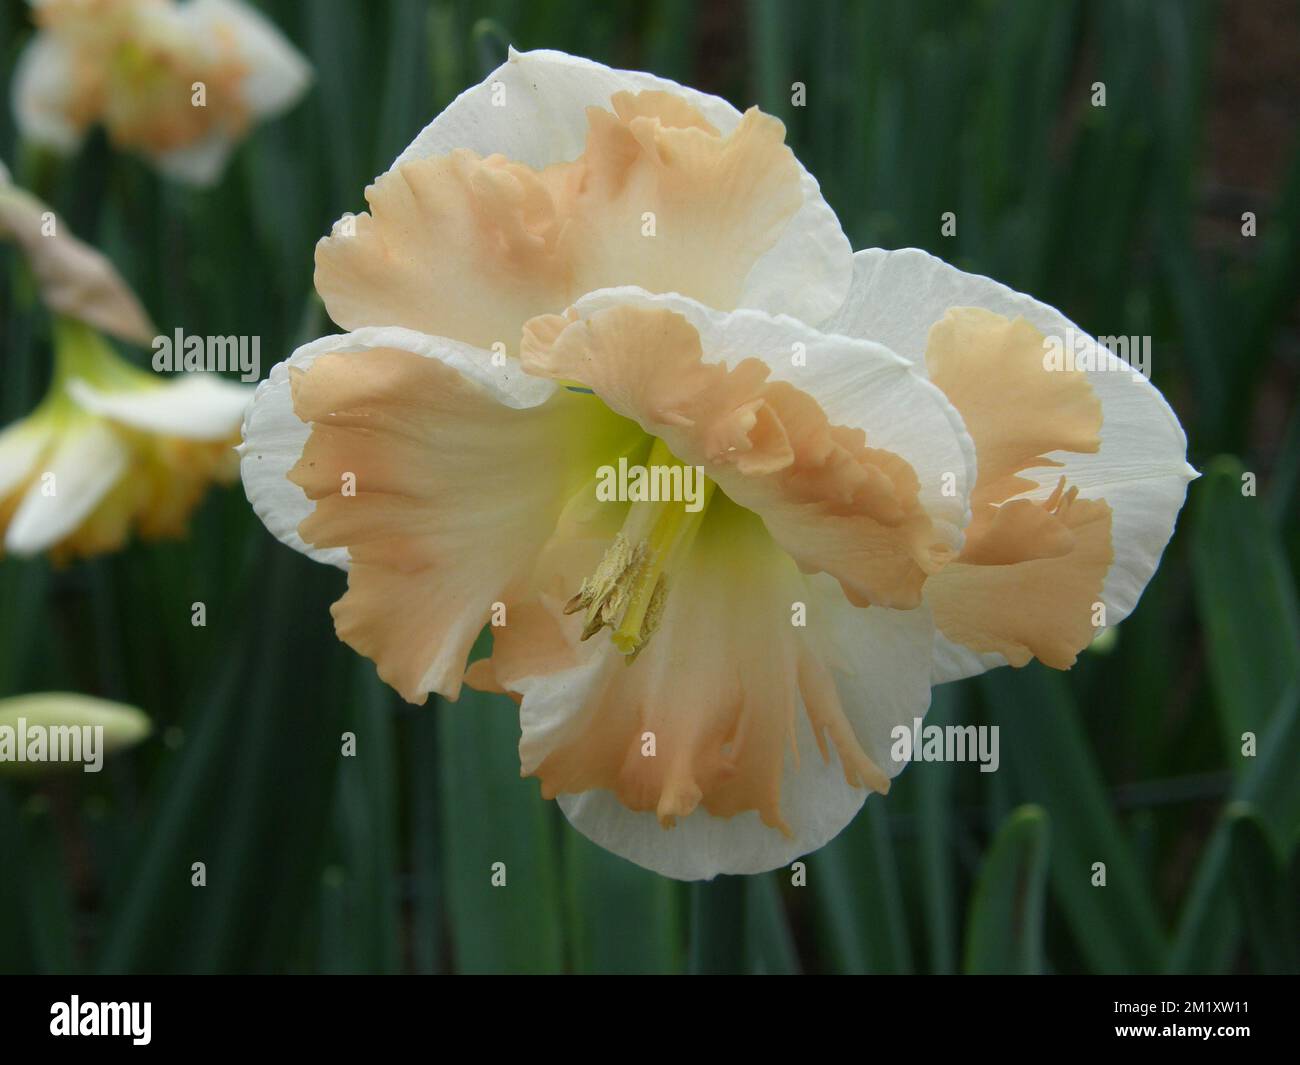 White and pink Collar daffodils (Narcissus) Chapelet bloom in a garden in March Stock Photo